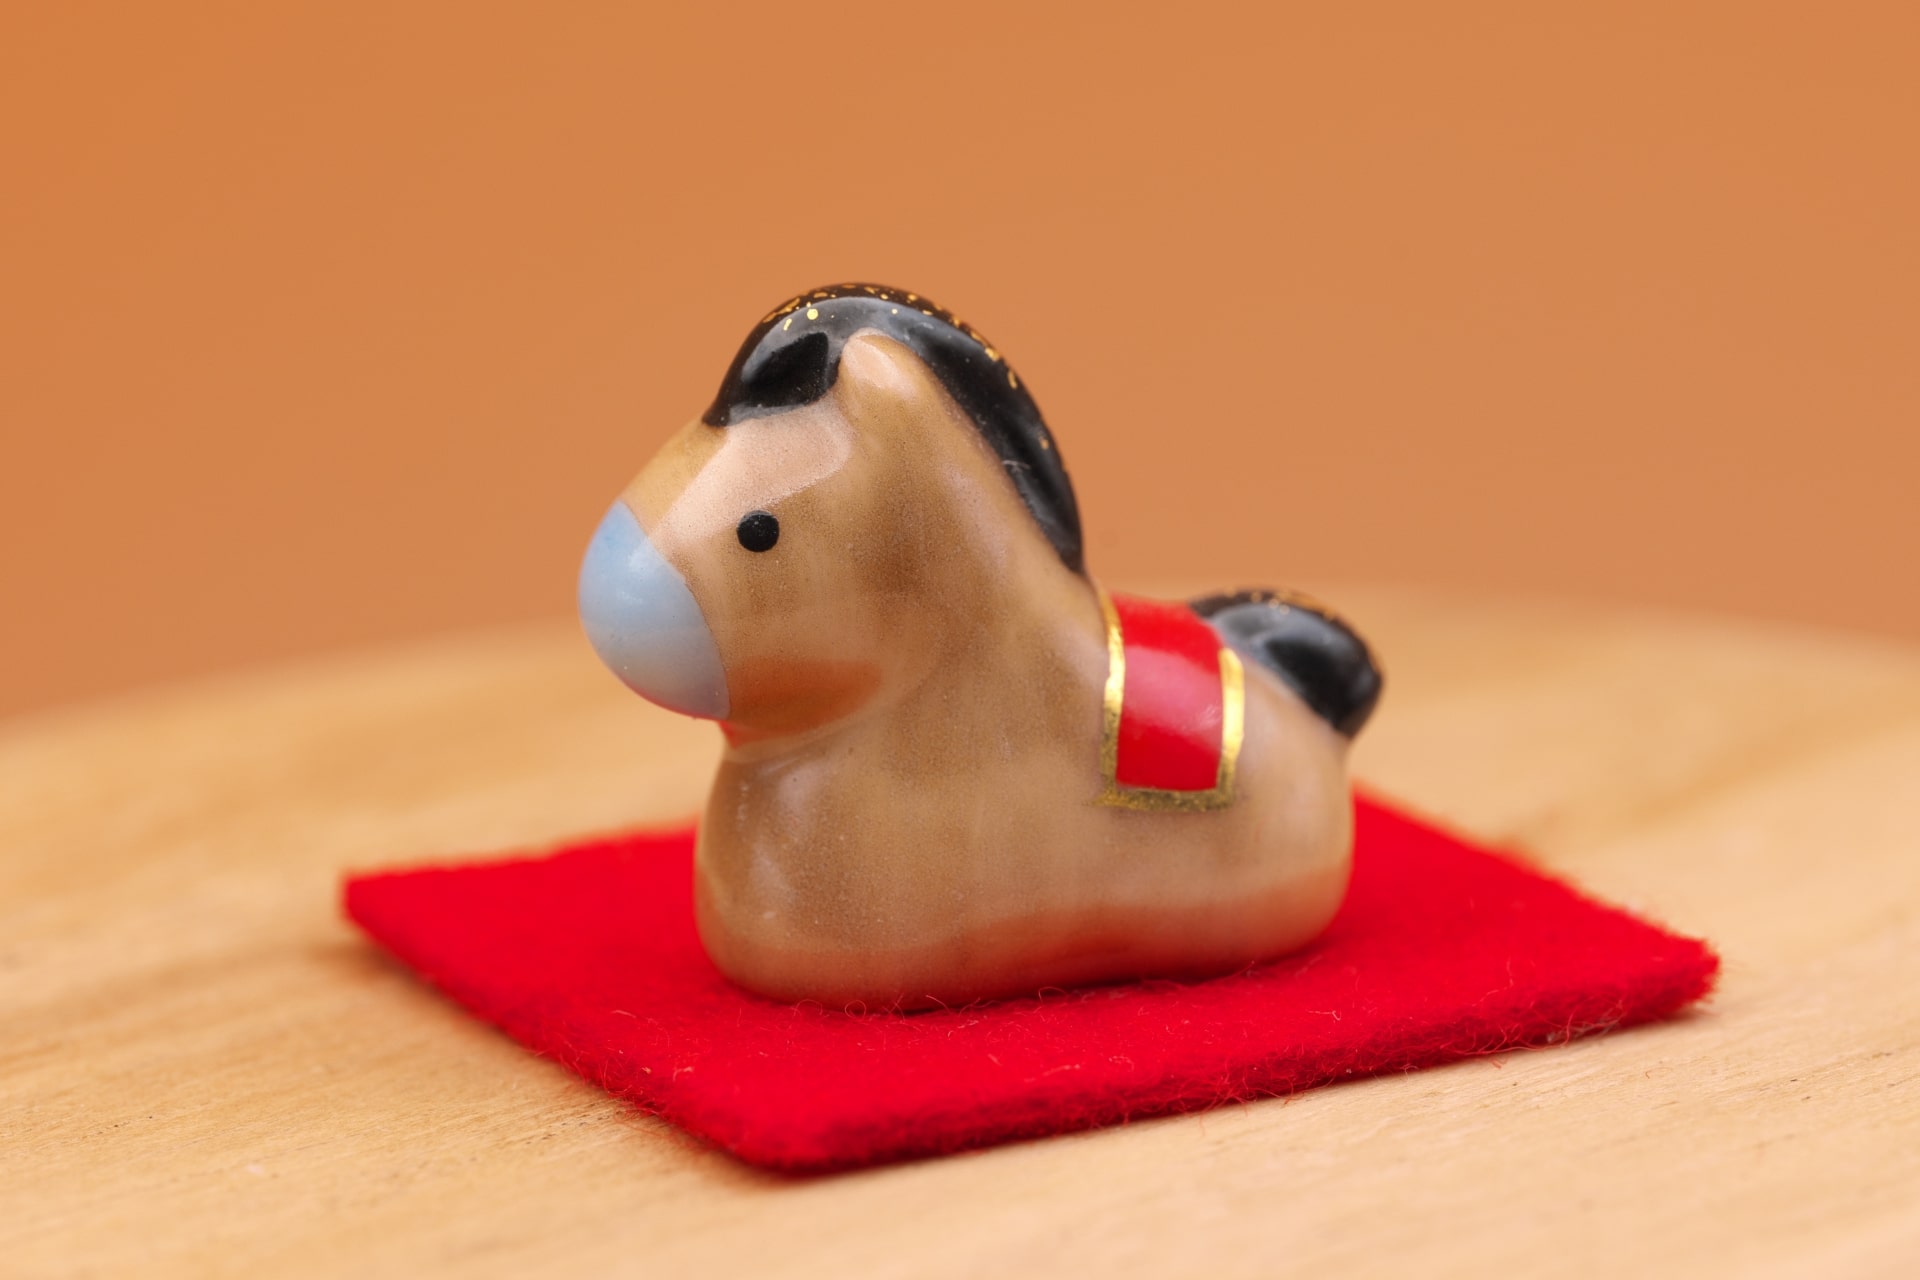 Small figurine depicting the horse from Chinese Zodiac